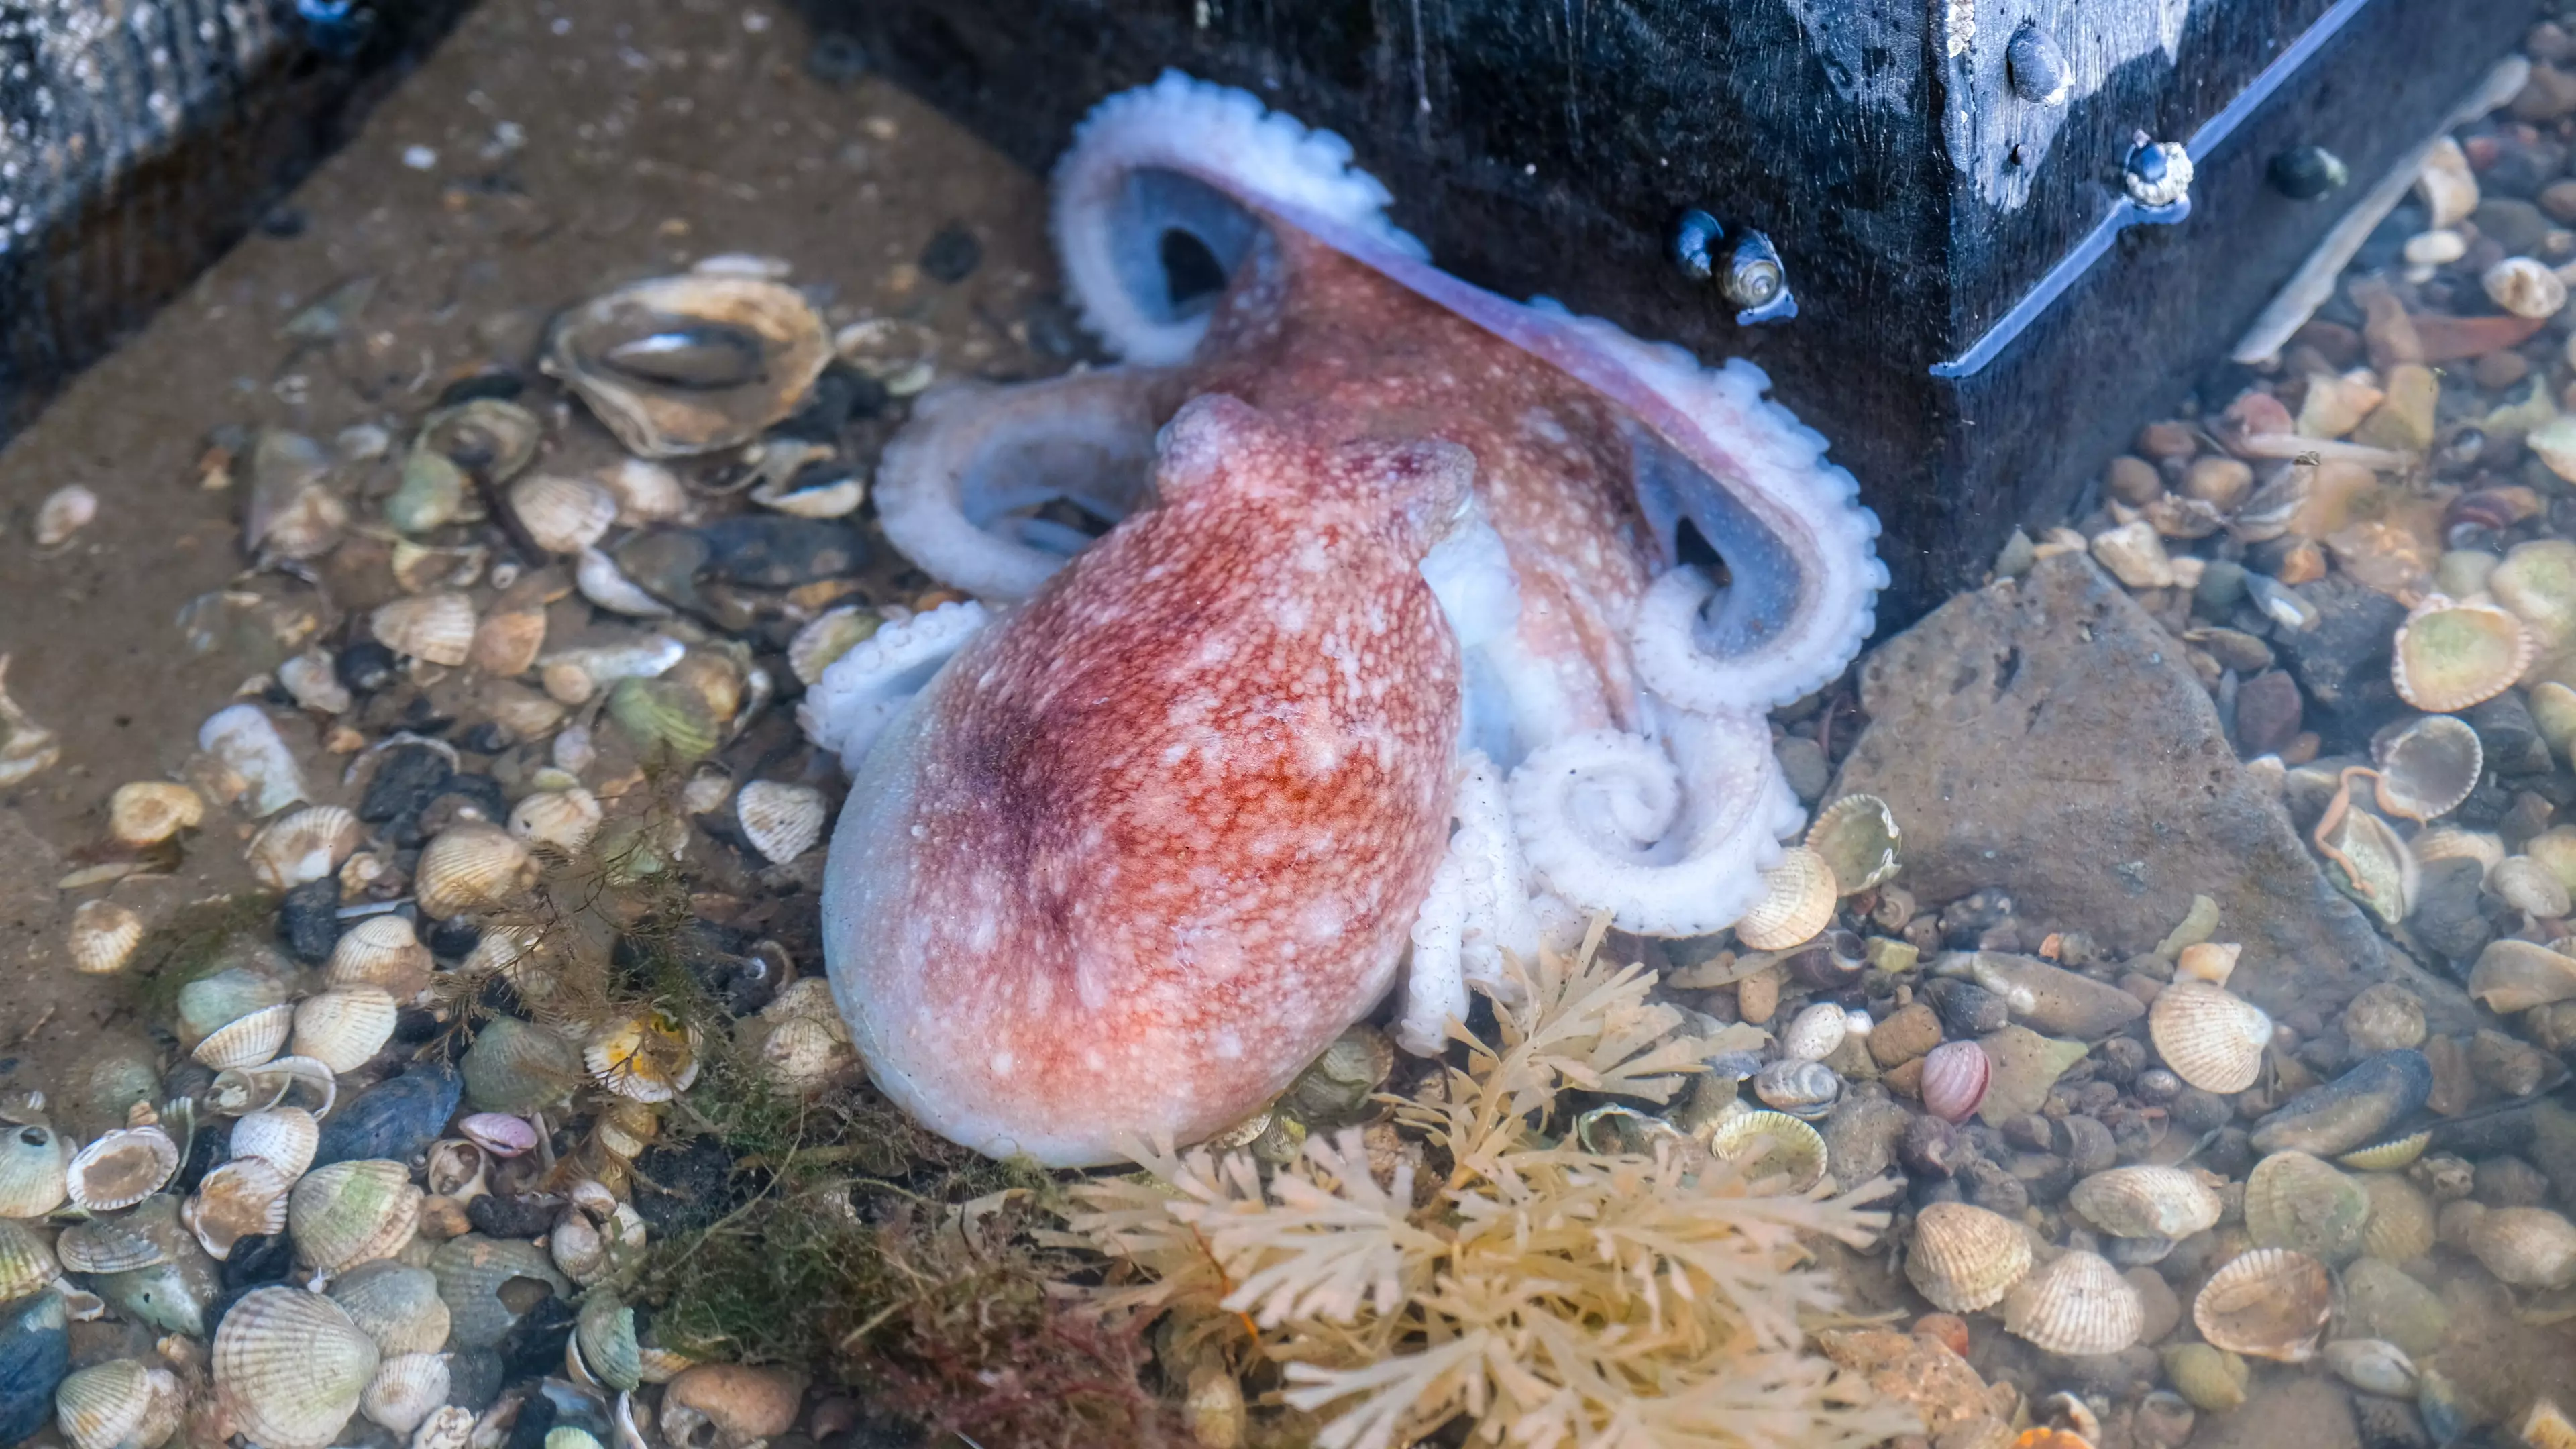 Beachgoers Urged To Stay Away From Octopus Dubbed 'Curly The Kraken' 